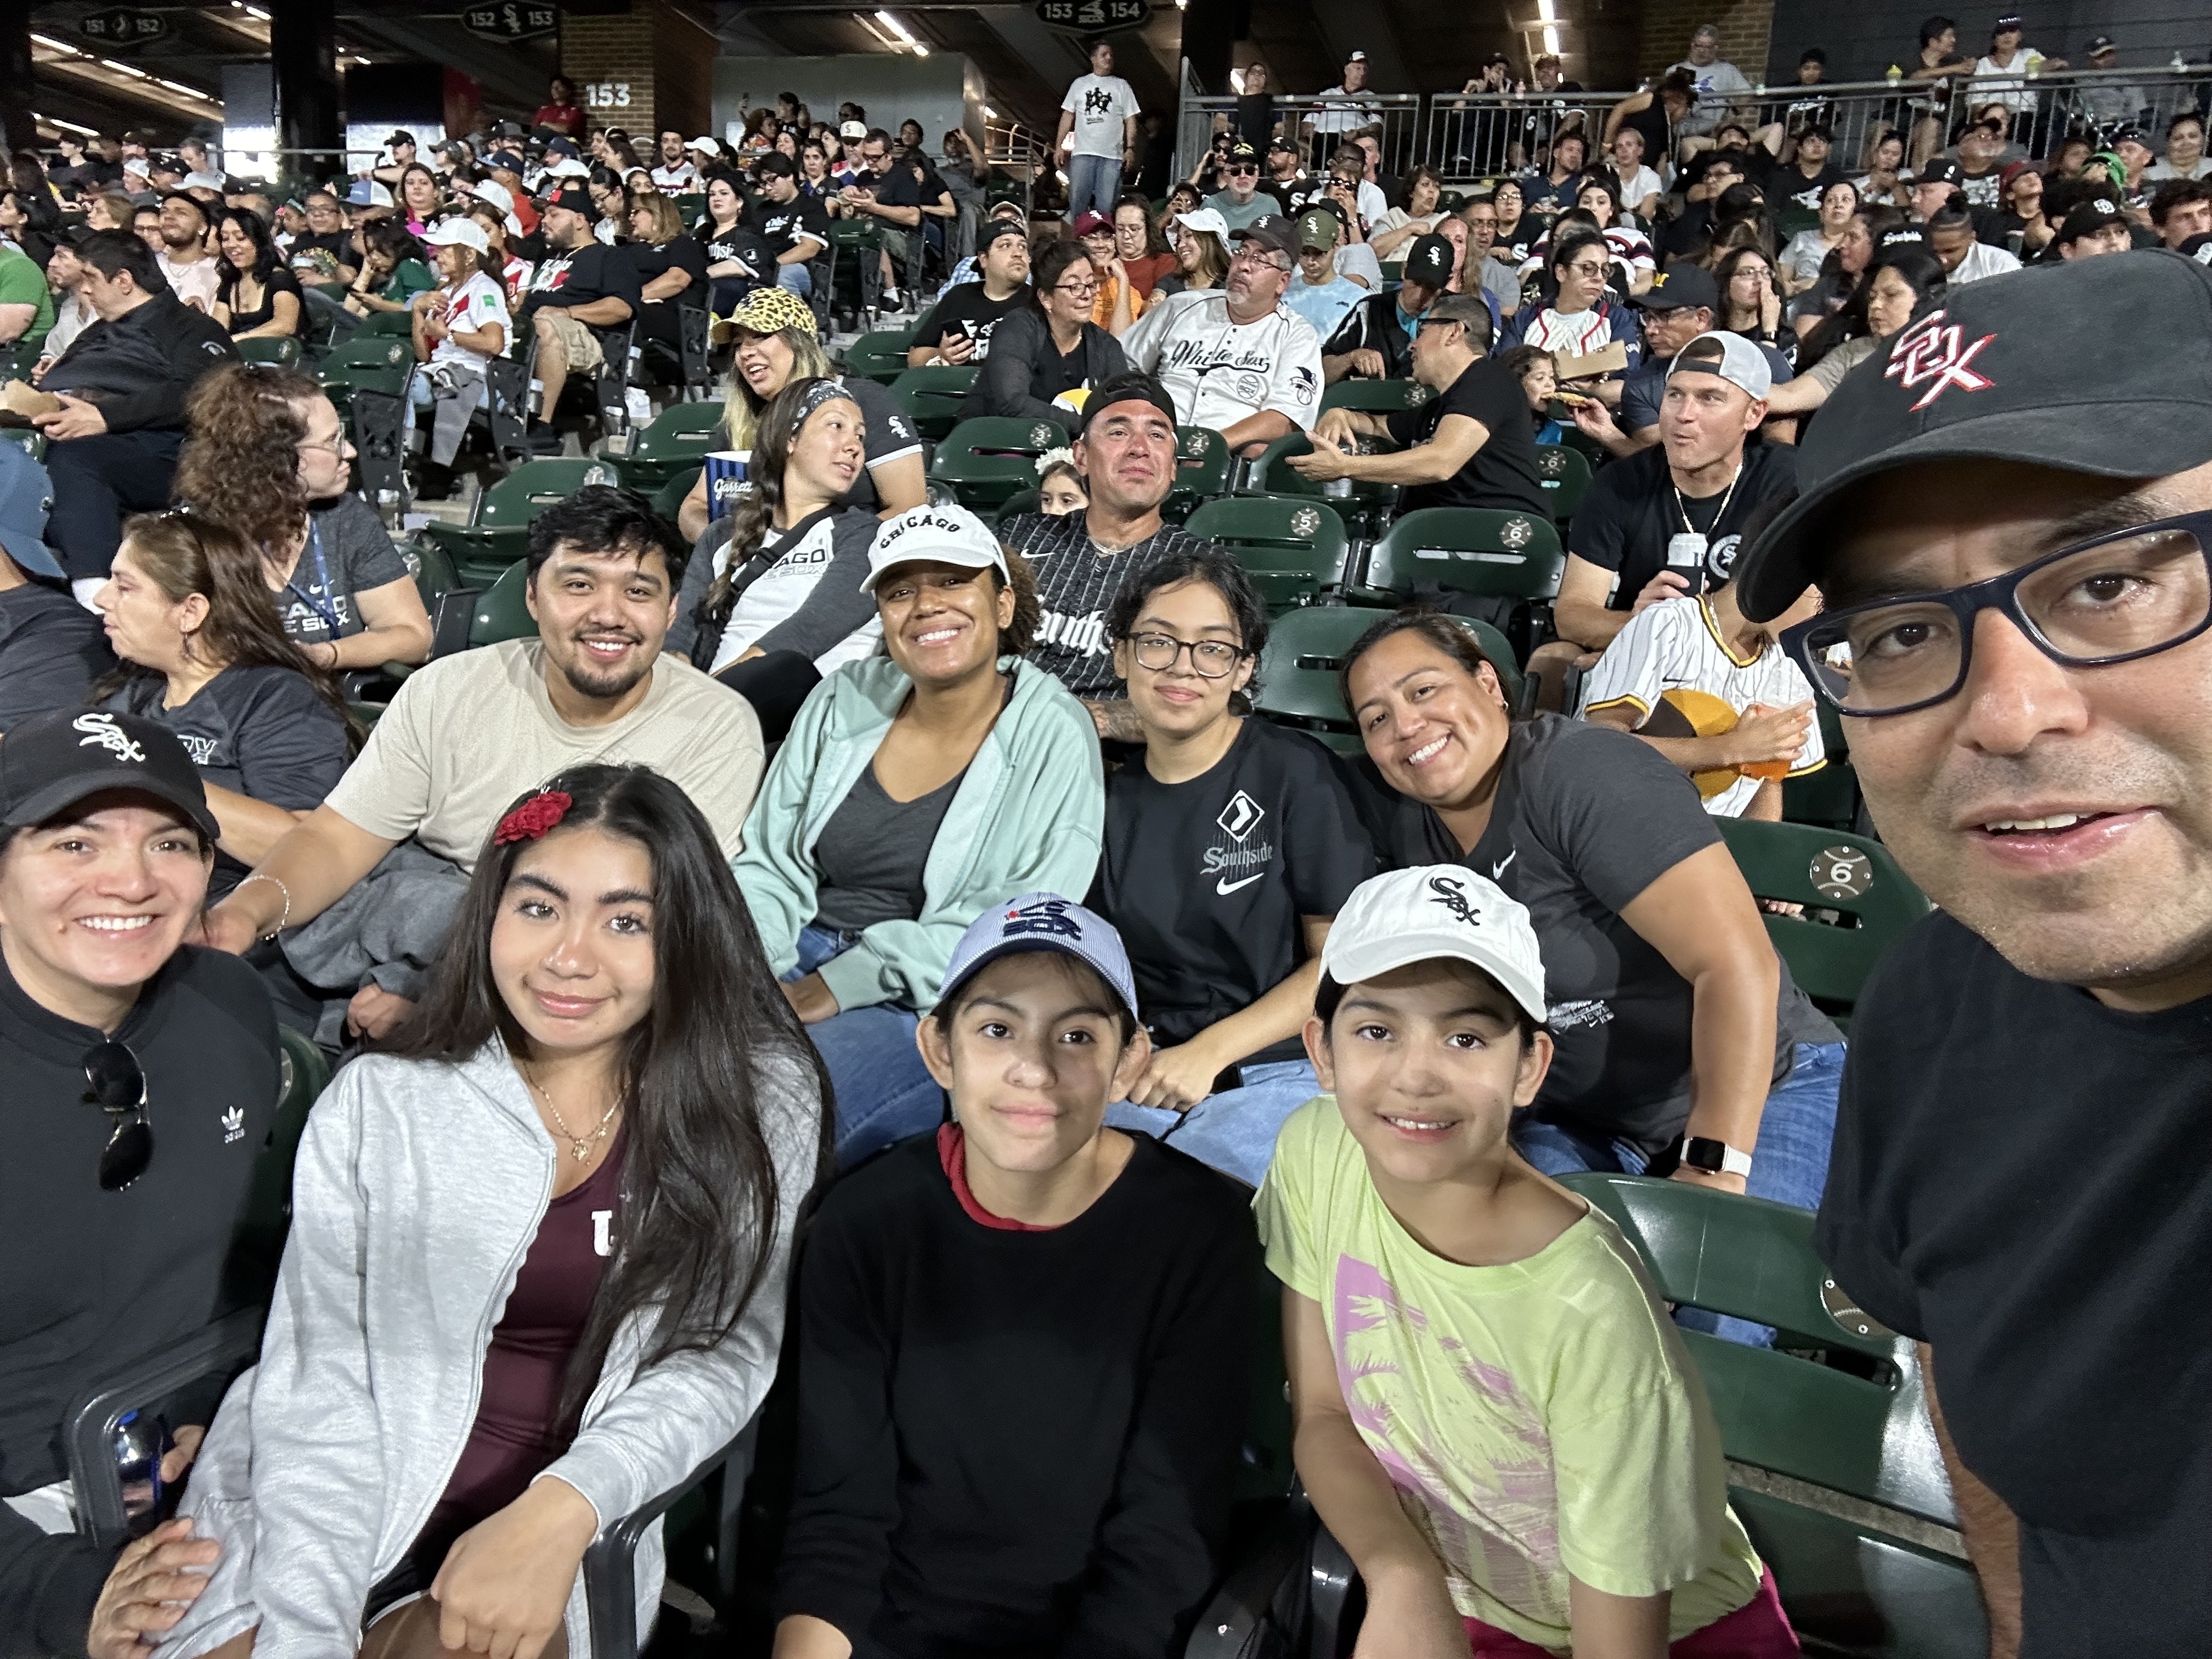 South Side Sox, a Chicago White Sox community